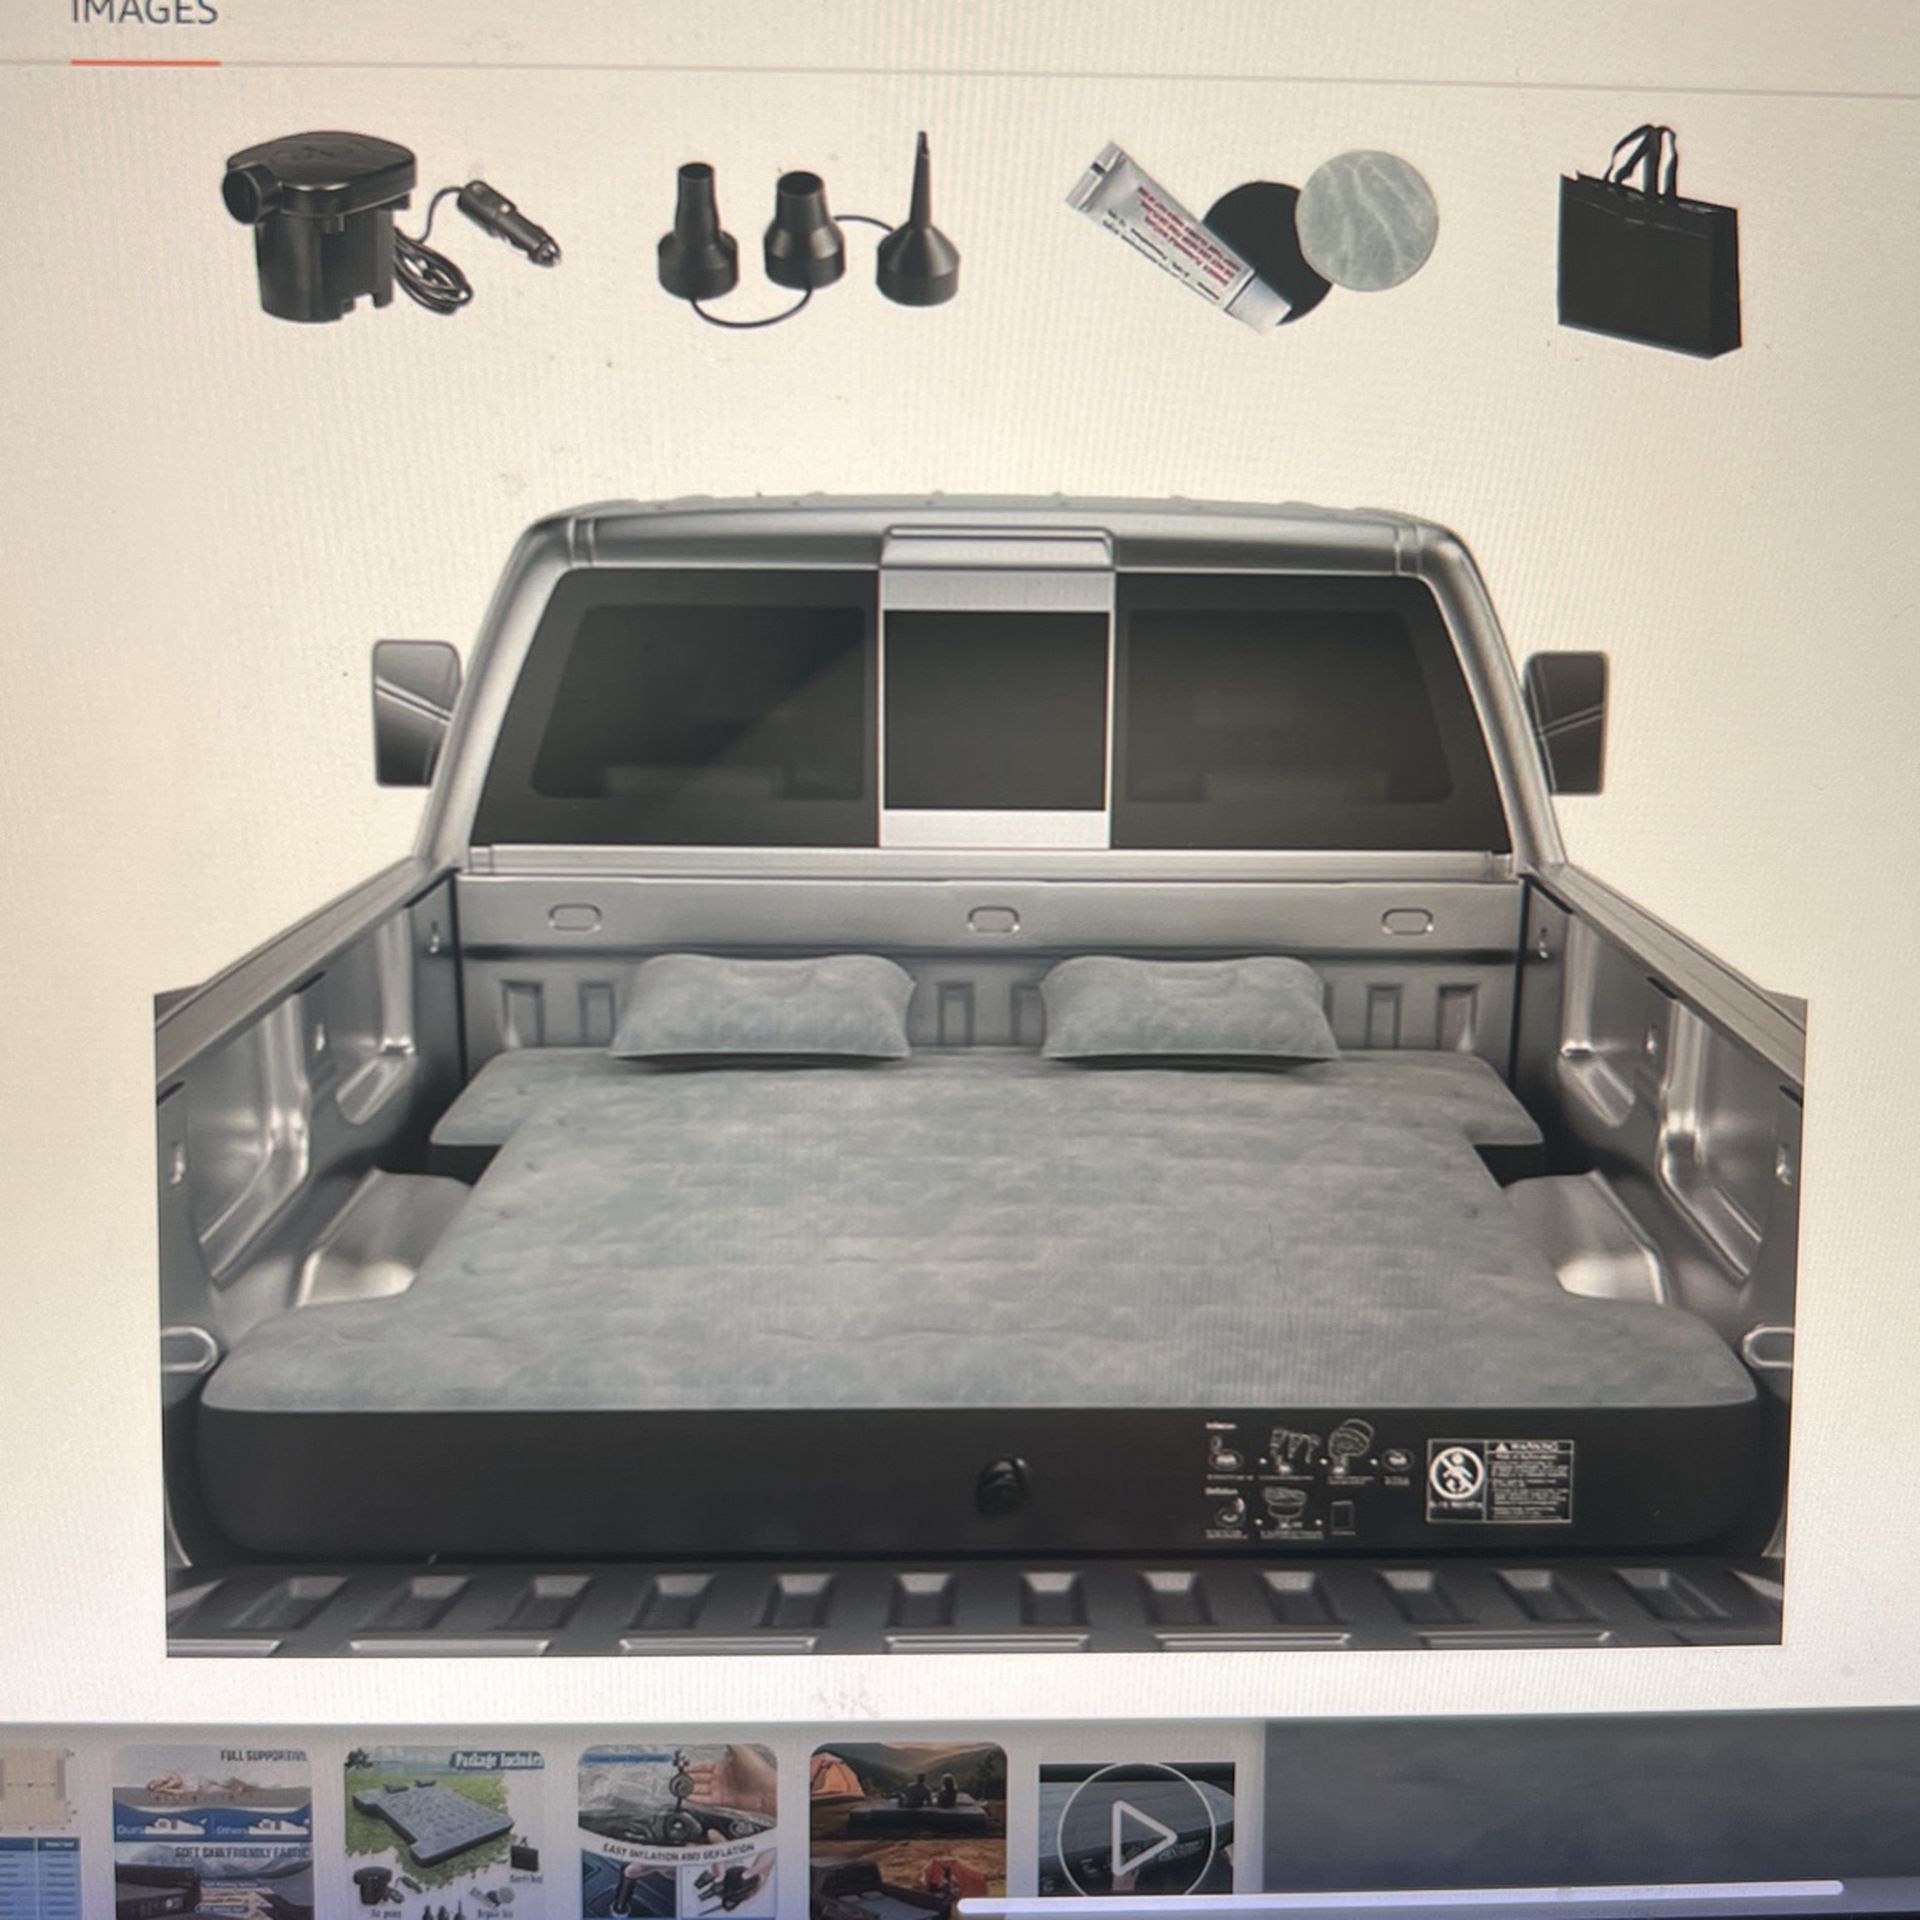 NEW TRUCK BED AIR MATTRESS. For 6-6.5ft, Full Size Truck Beds. Inflatable Mattress w/Pump. With Carry Bag & Color Is Gray. 